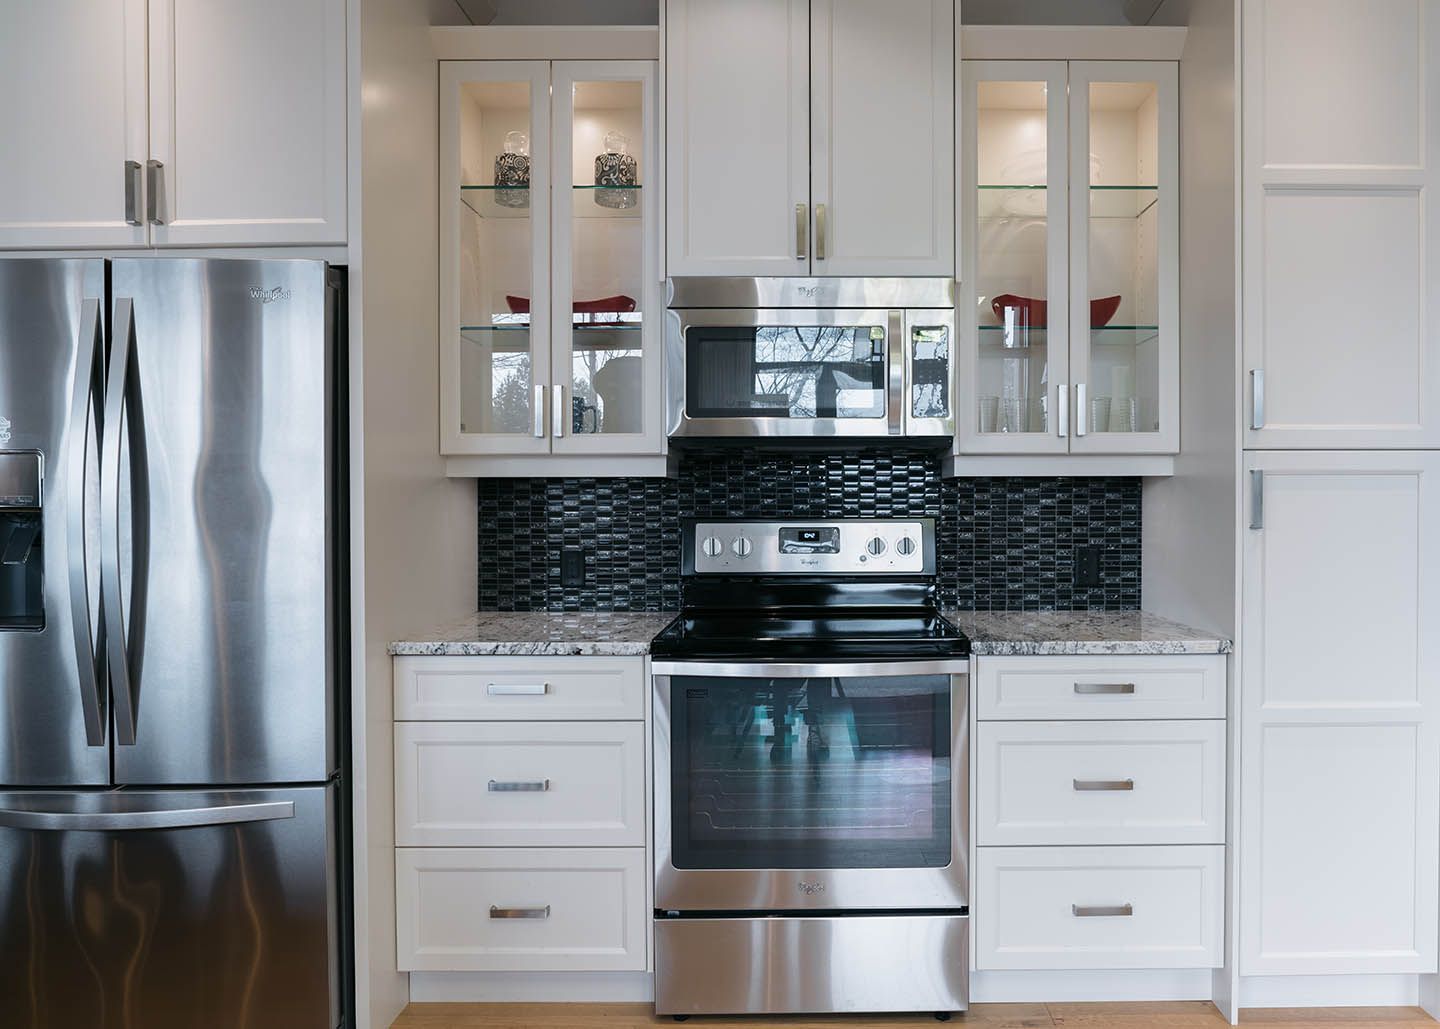 Stainless steel appliances and white cabinets in a kitchen